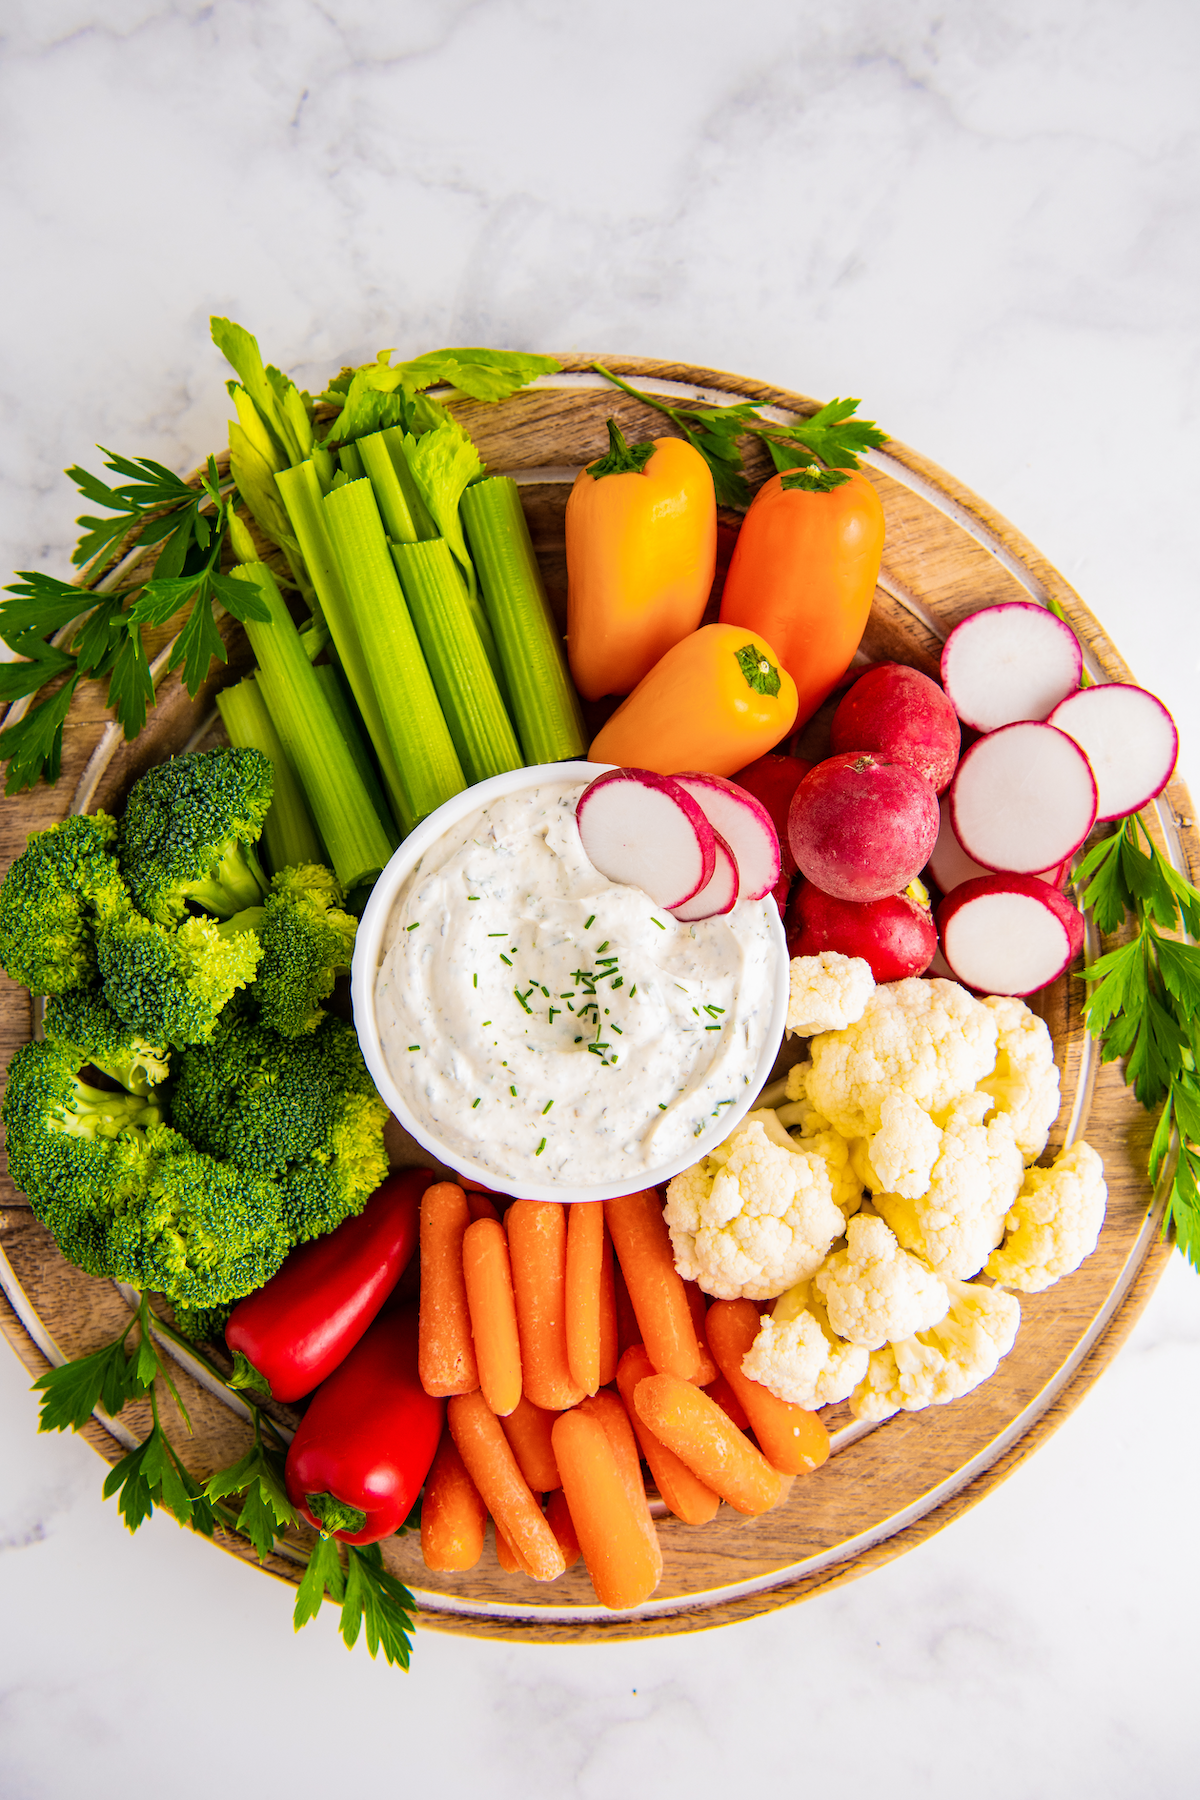 Overhead view of a round tray filled with celery, broccoli, carrots, peppers, radishes, and cauliflower, with a bowl of ranch in the middle